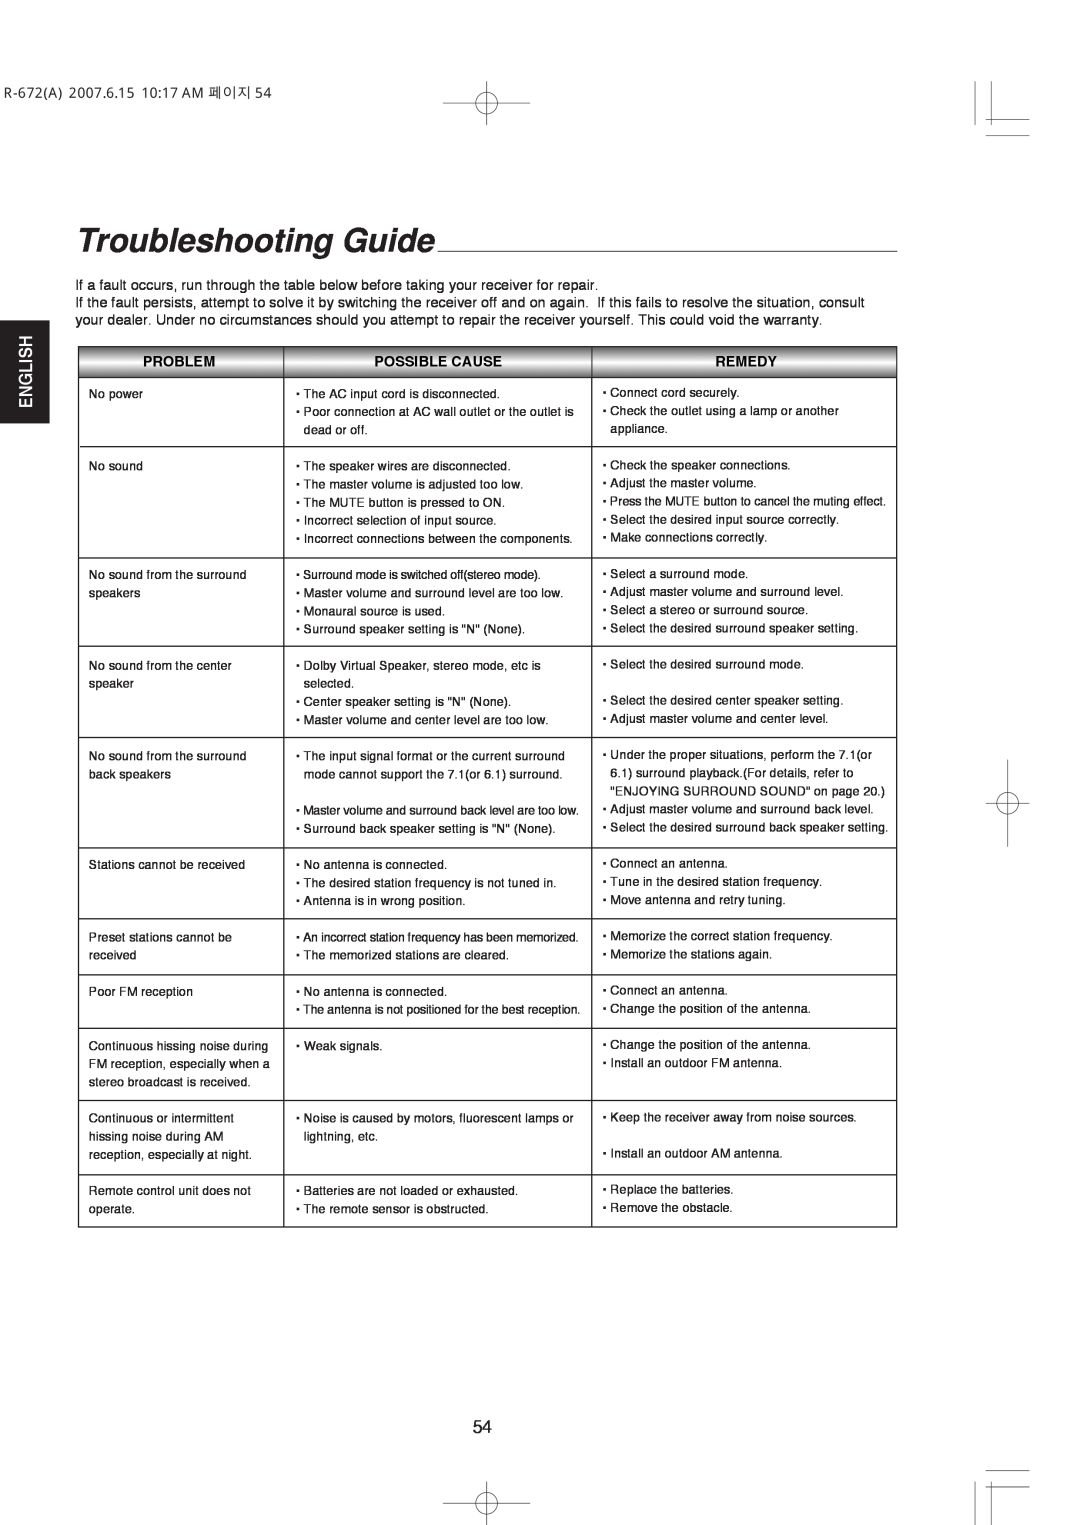 XM Satellite Radio manual Troubleshooting Guide, English, R-672A2007.6.15 10 17 AM 페이지, Problem, Possible Cause, Remedy 